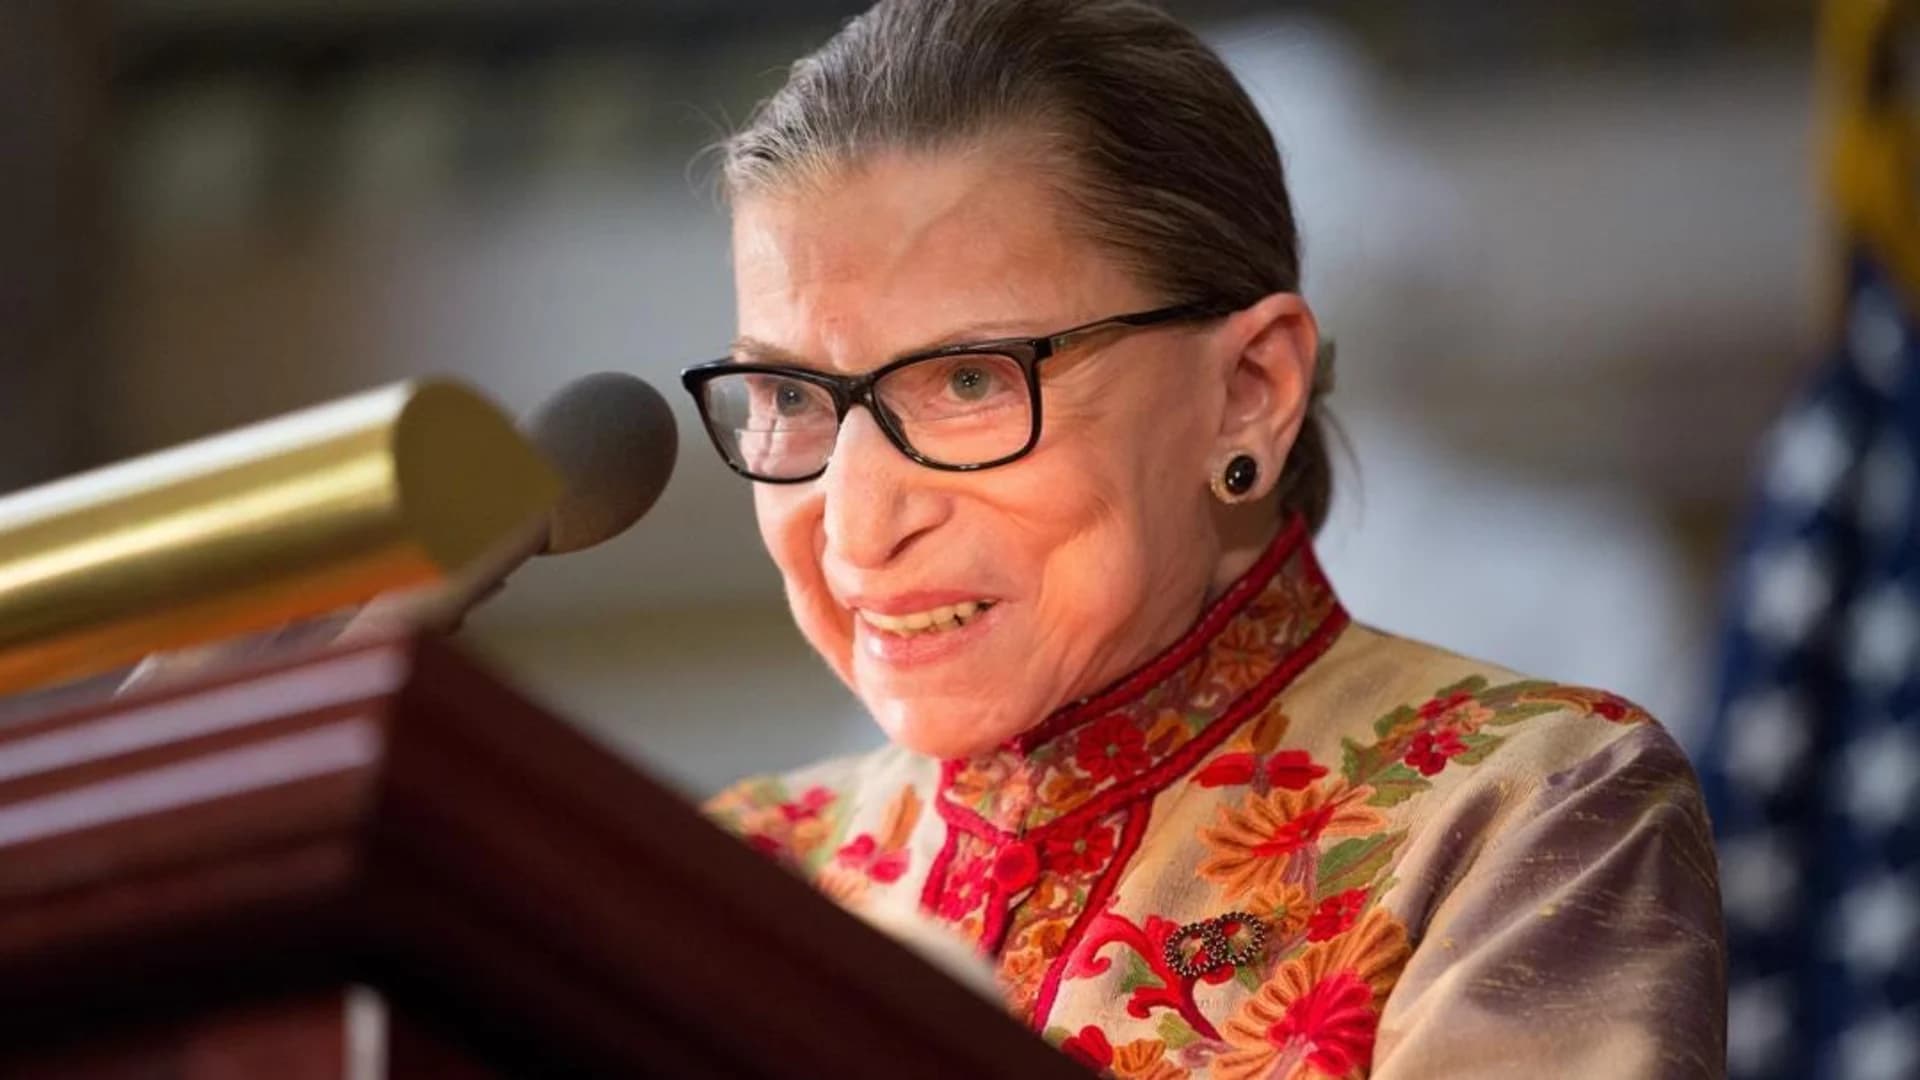 Justice Ginsburg has surgery to remove cancerous growths